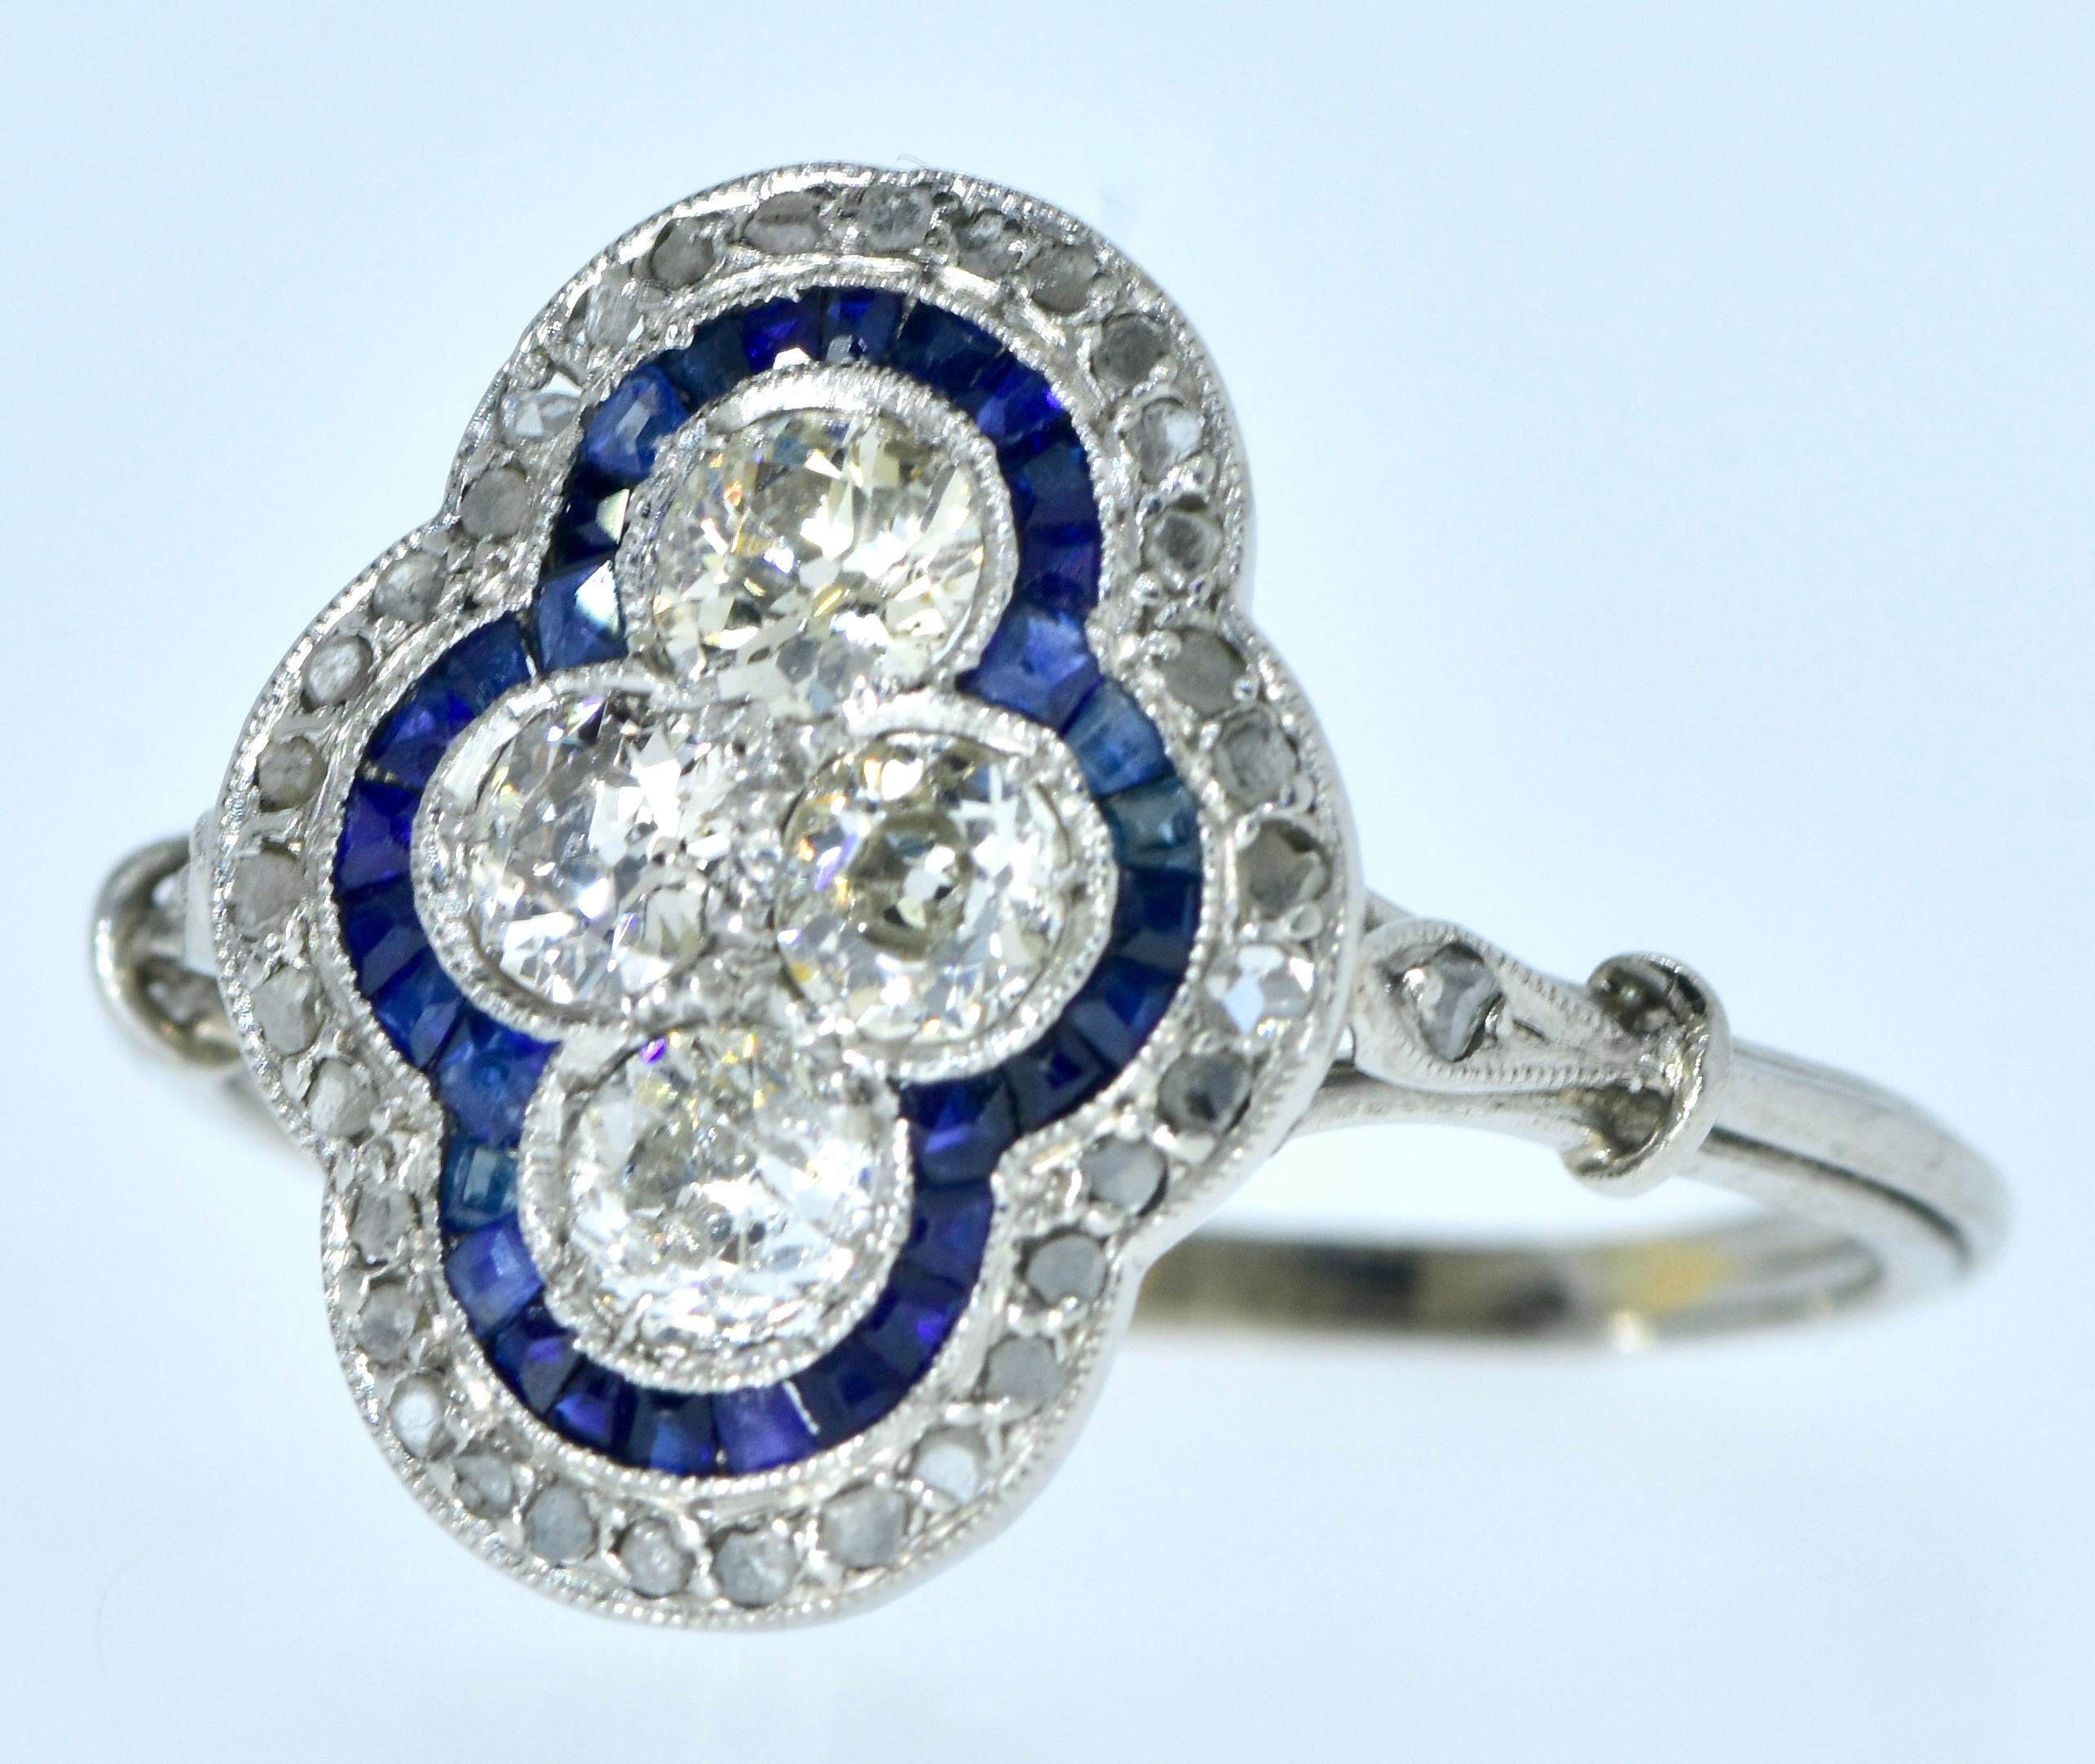 Antique Edwardian Diamond and Sapphire Ring in excellent condition, circa 1915 For Sale 1